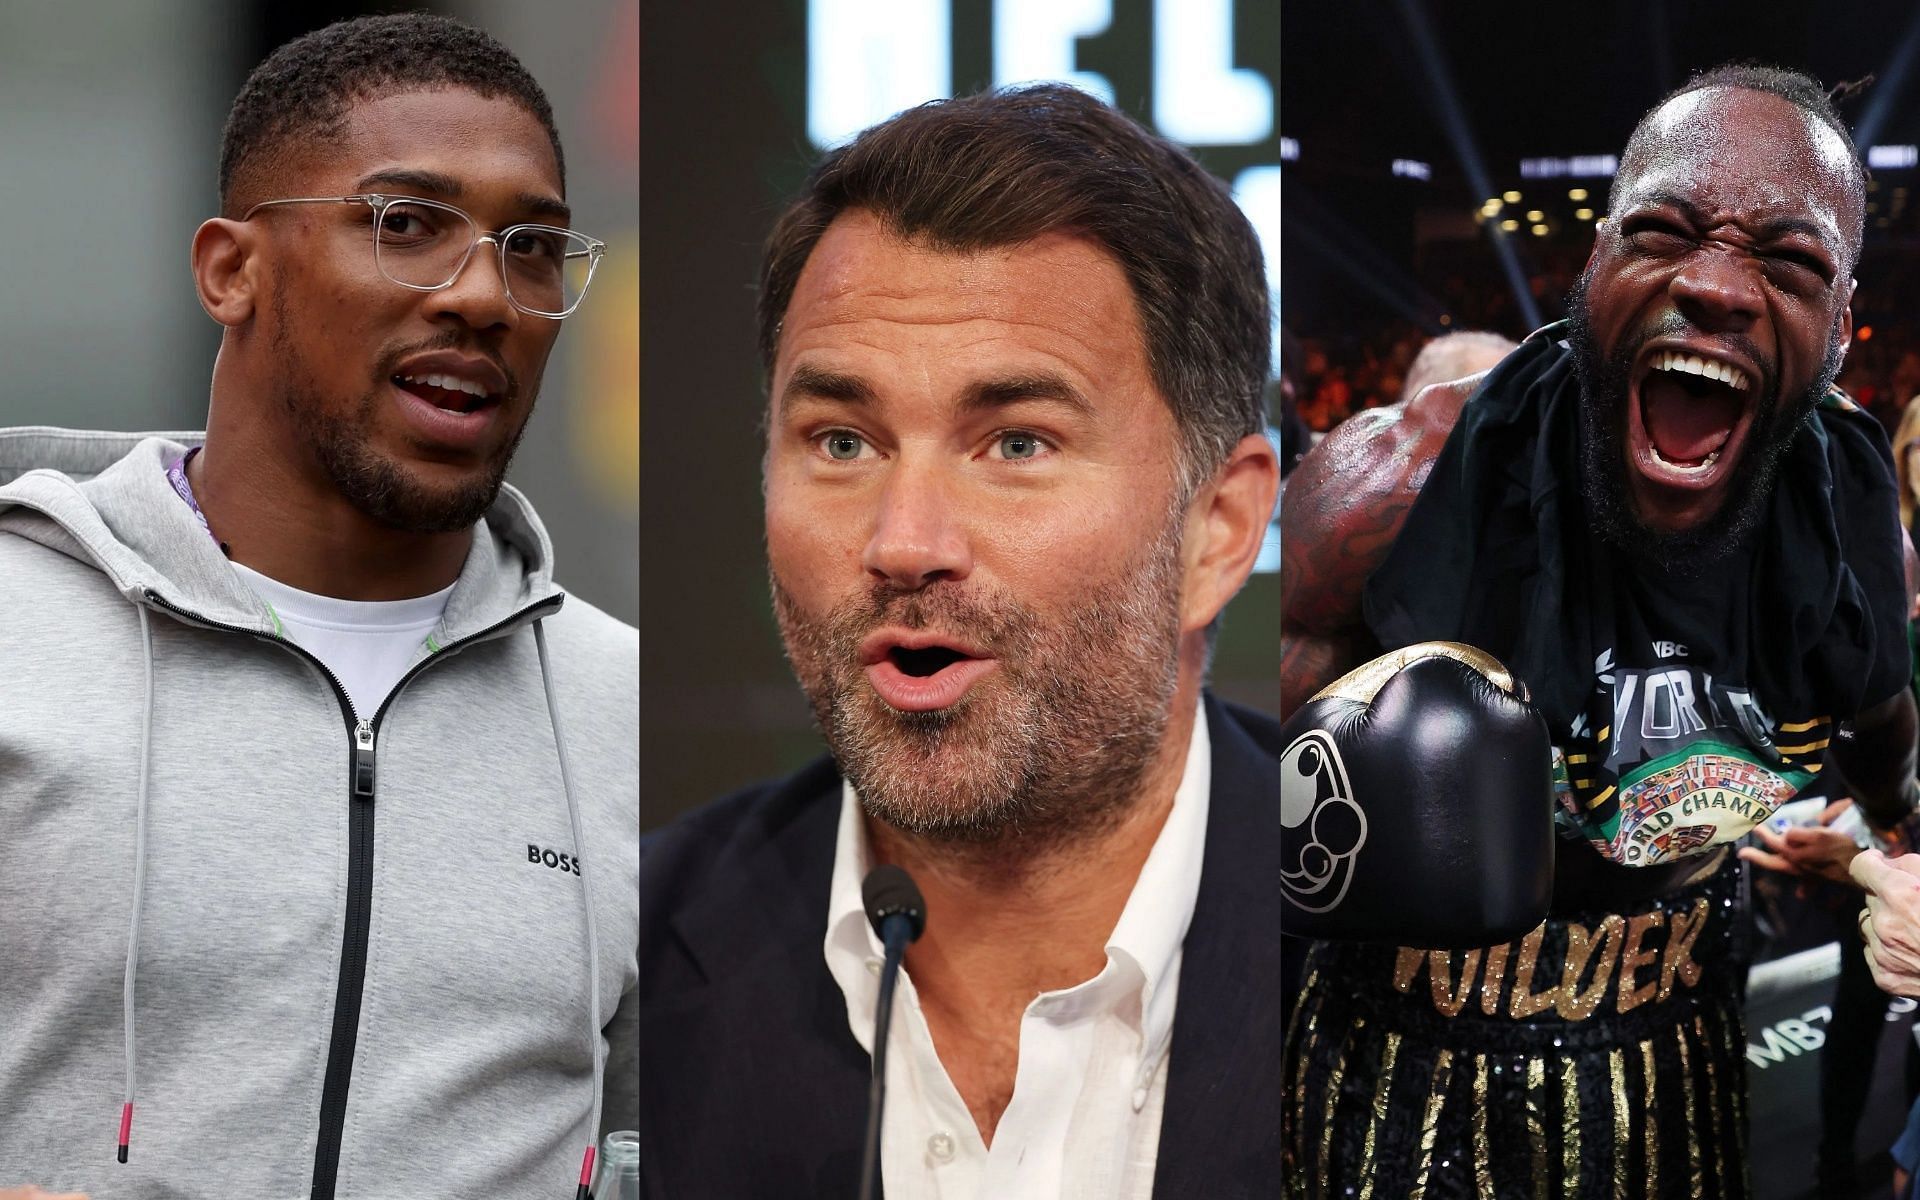 Joshua (L), Hearn (M), Wilder (R) [Images from Getty].